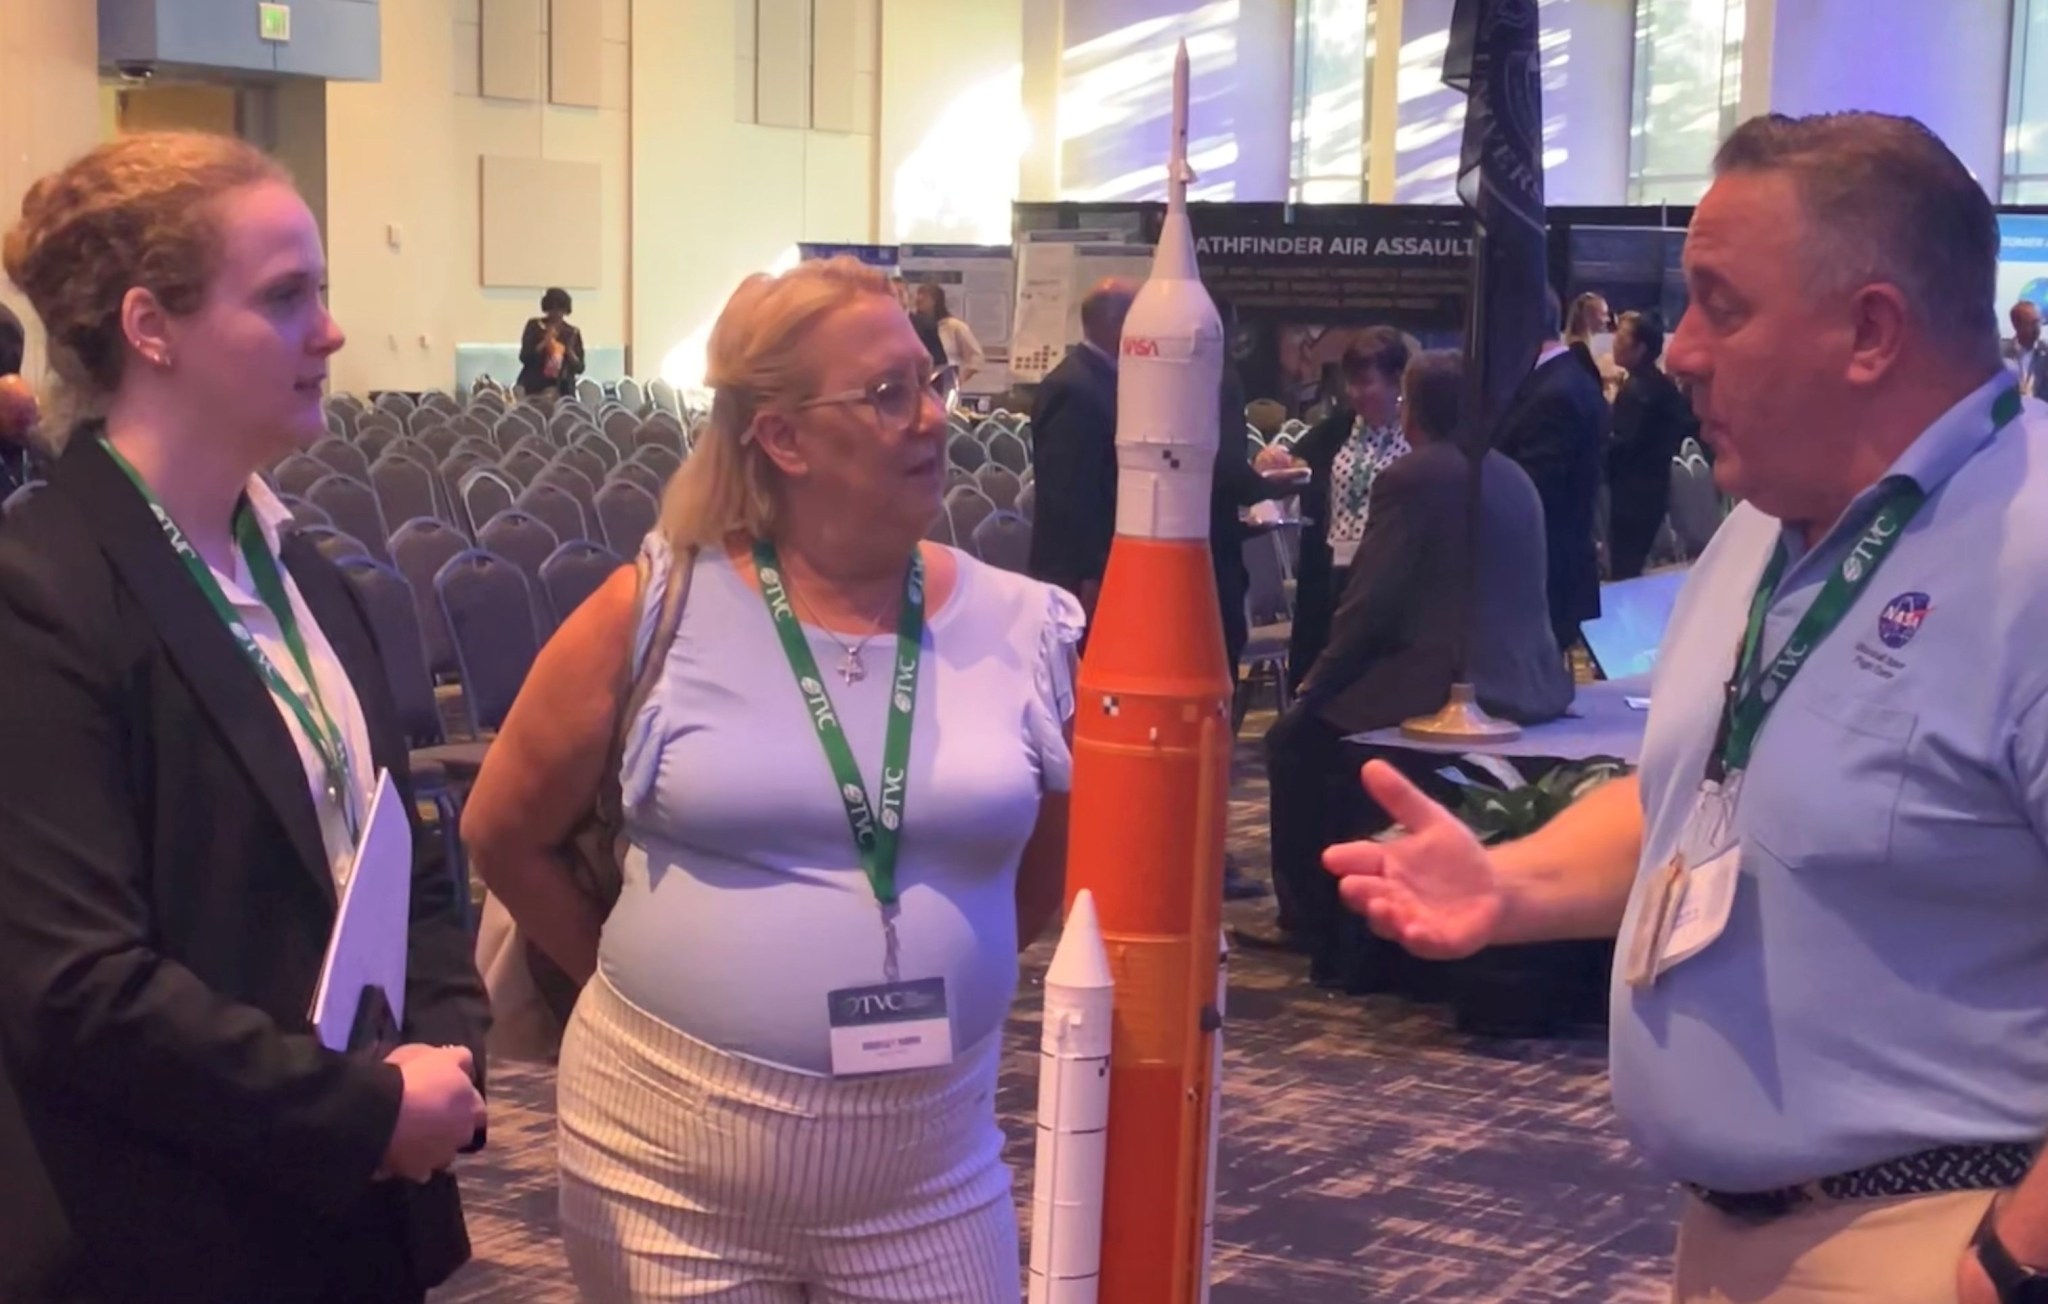 Trey Cate, right, SLS strategic communications manager at Marshall, talks with TVC National Summit attendees about the Space Launch System and NASA’s Artemis Program during a break between panel sessions at the May 29-30 event, hosted by Vanderbilt University in Nashville.